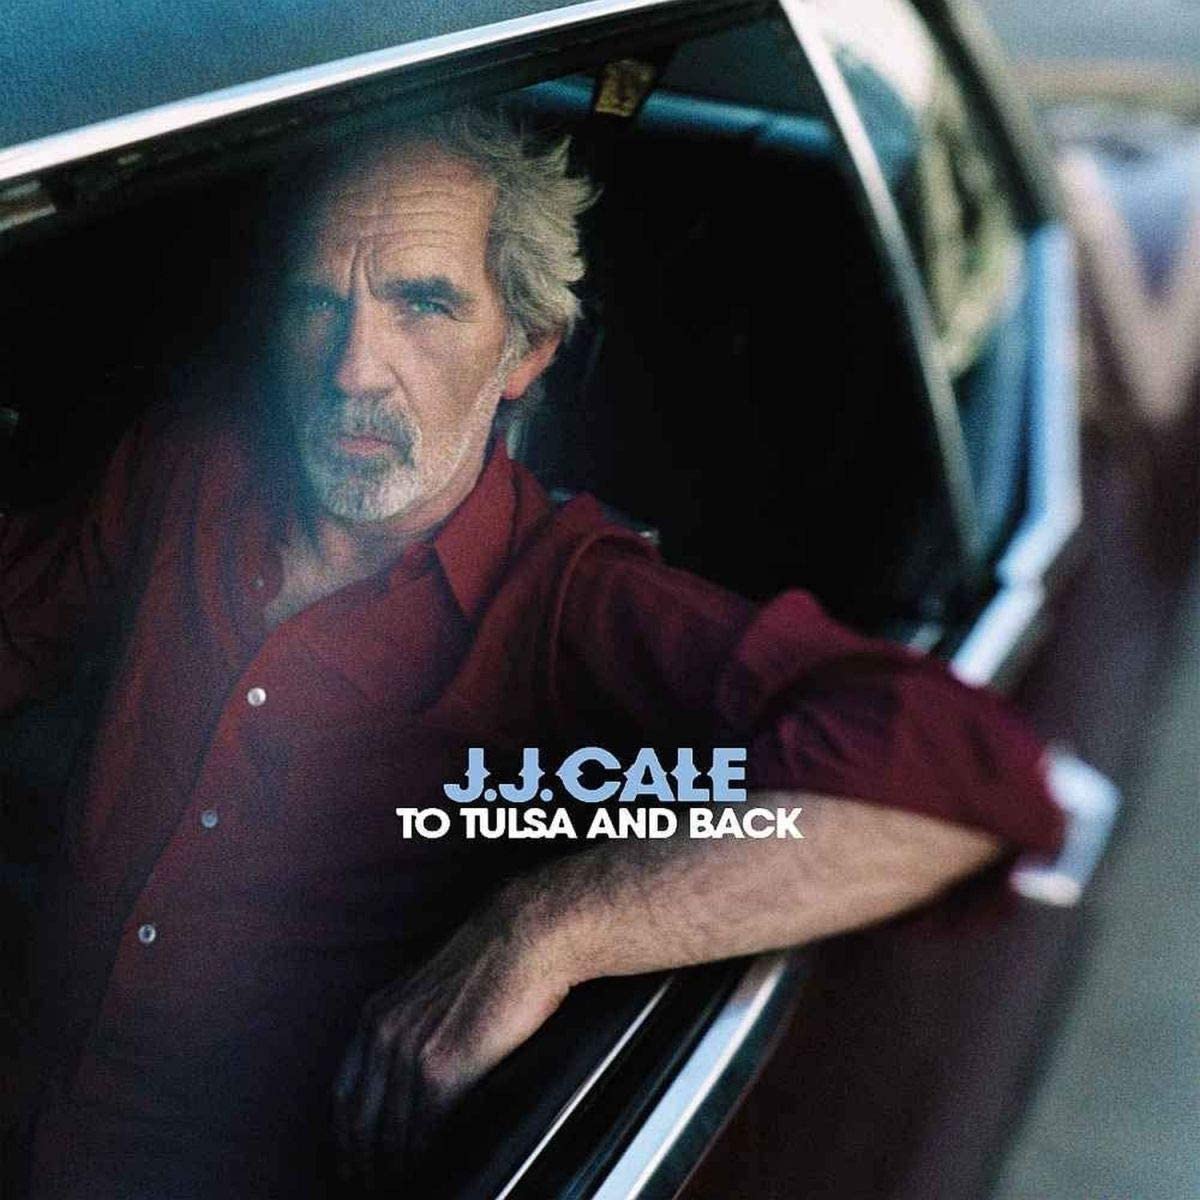 Cale, J.J./To Tulsa And Back [CD]